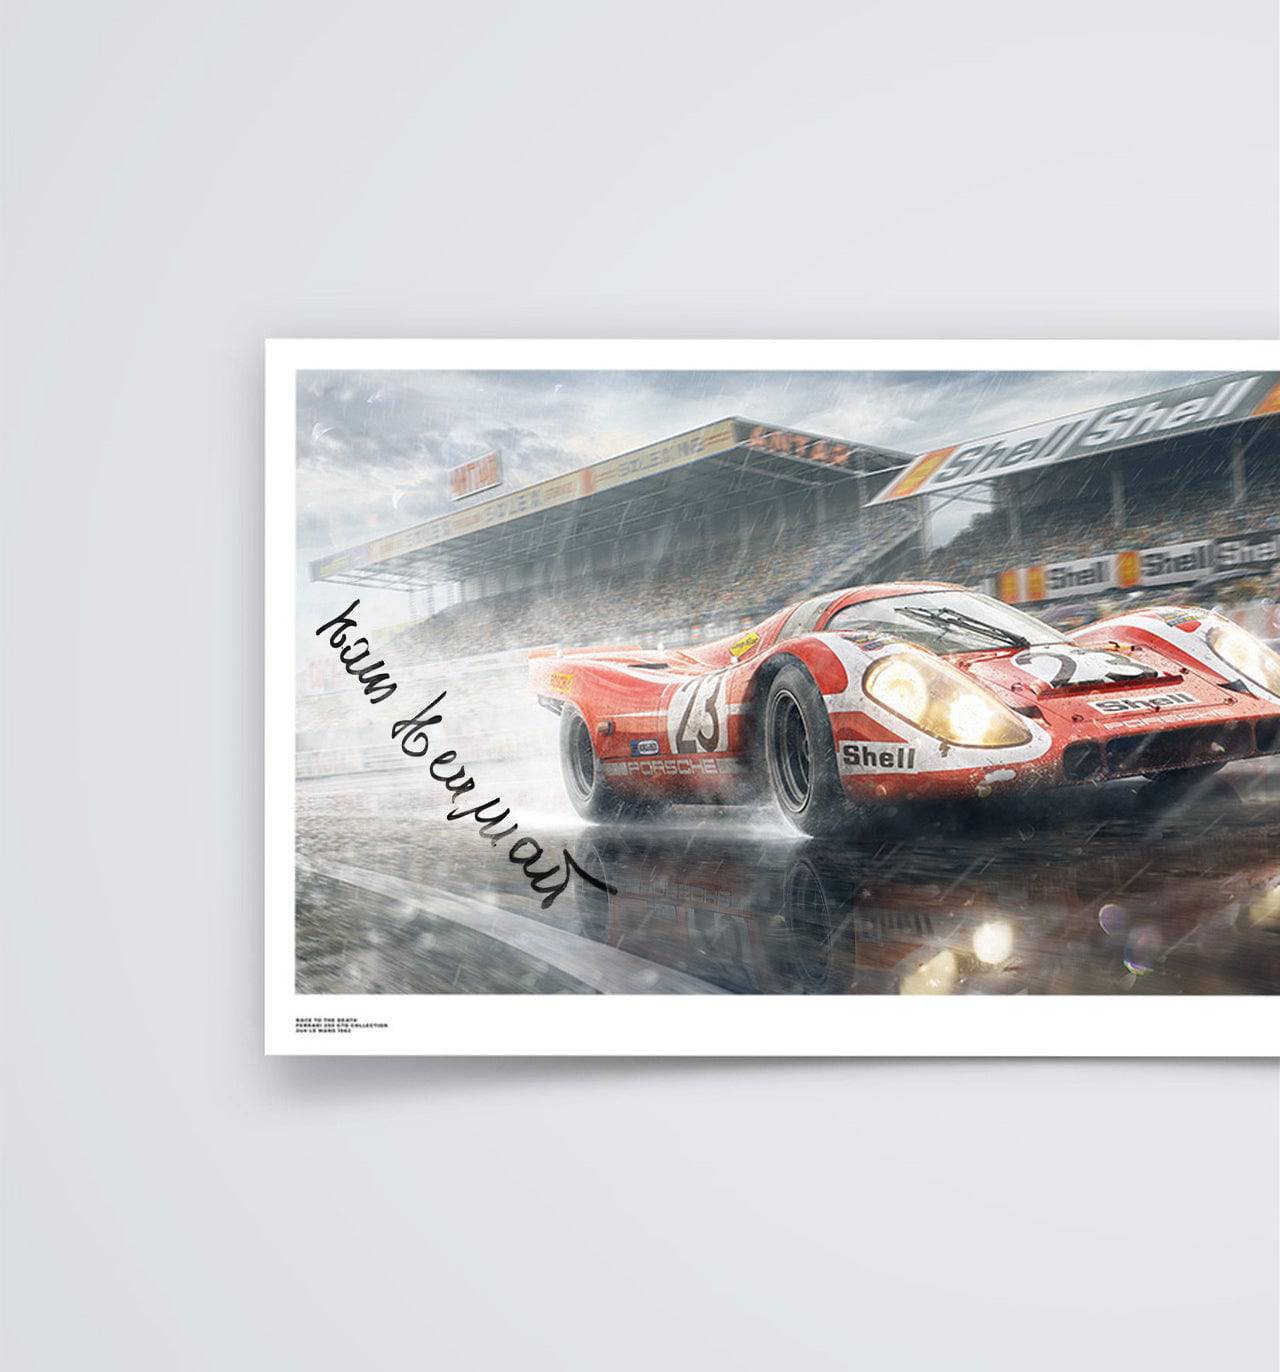 Signed by Hans Herrmann - German Engineering, Hollywood Ending - Porsche 917K - 24 Hours of Le Mans - 1970 | Small Fine Art Print - Automobilist